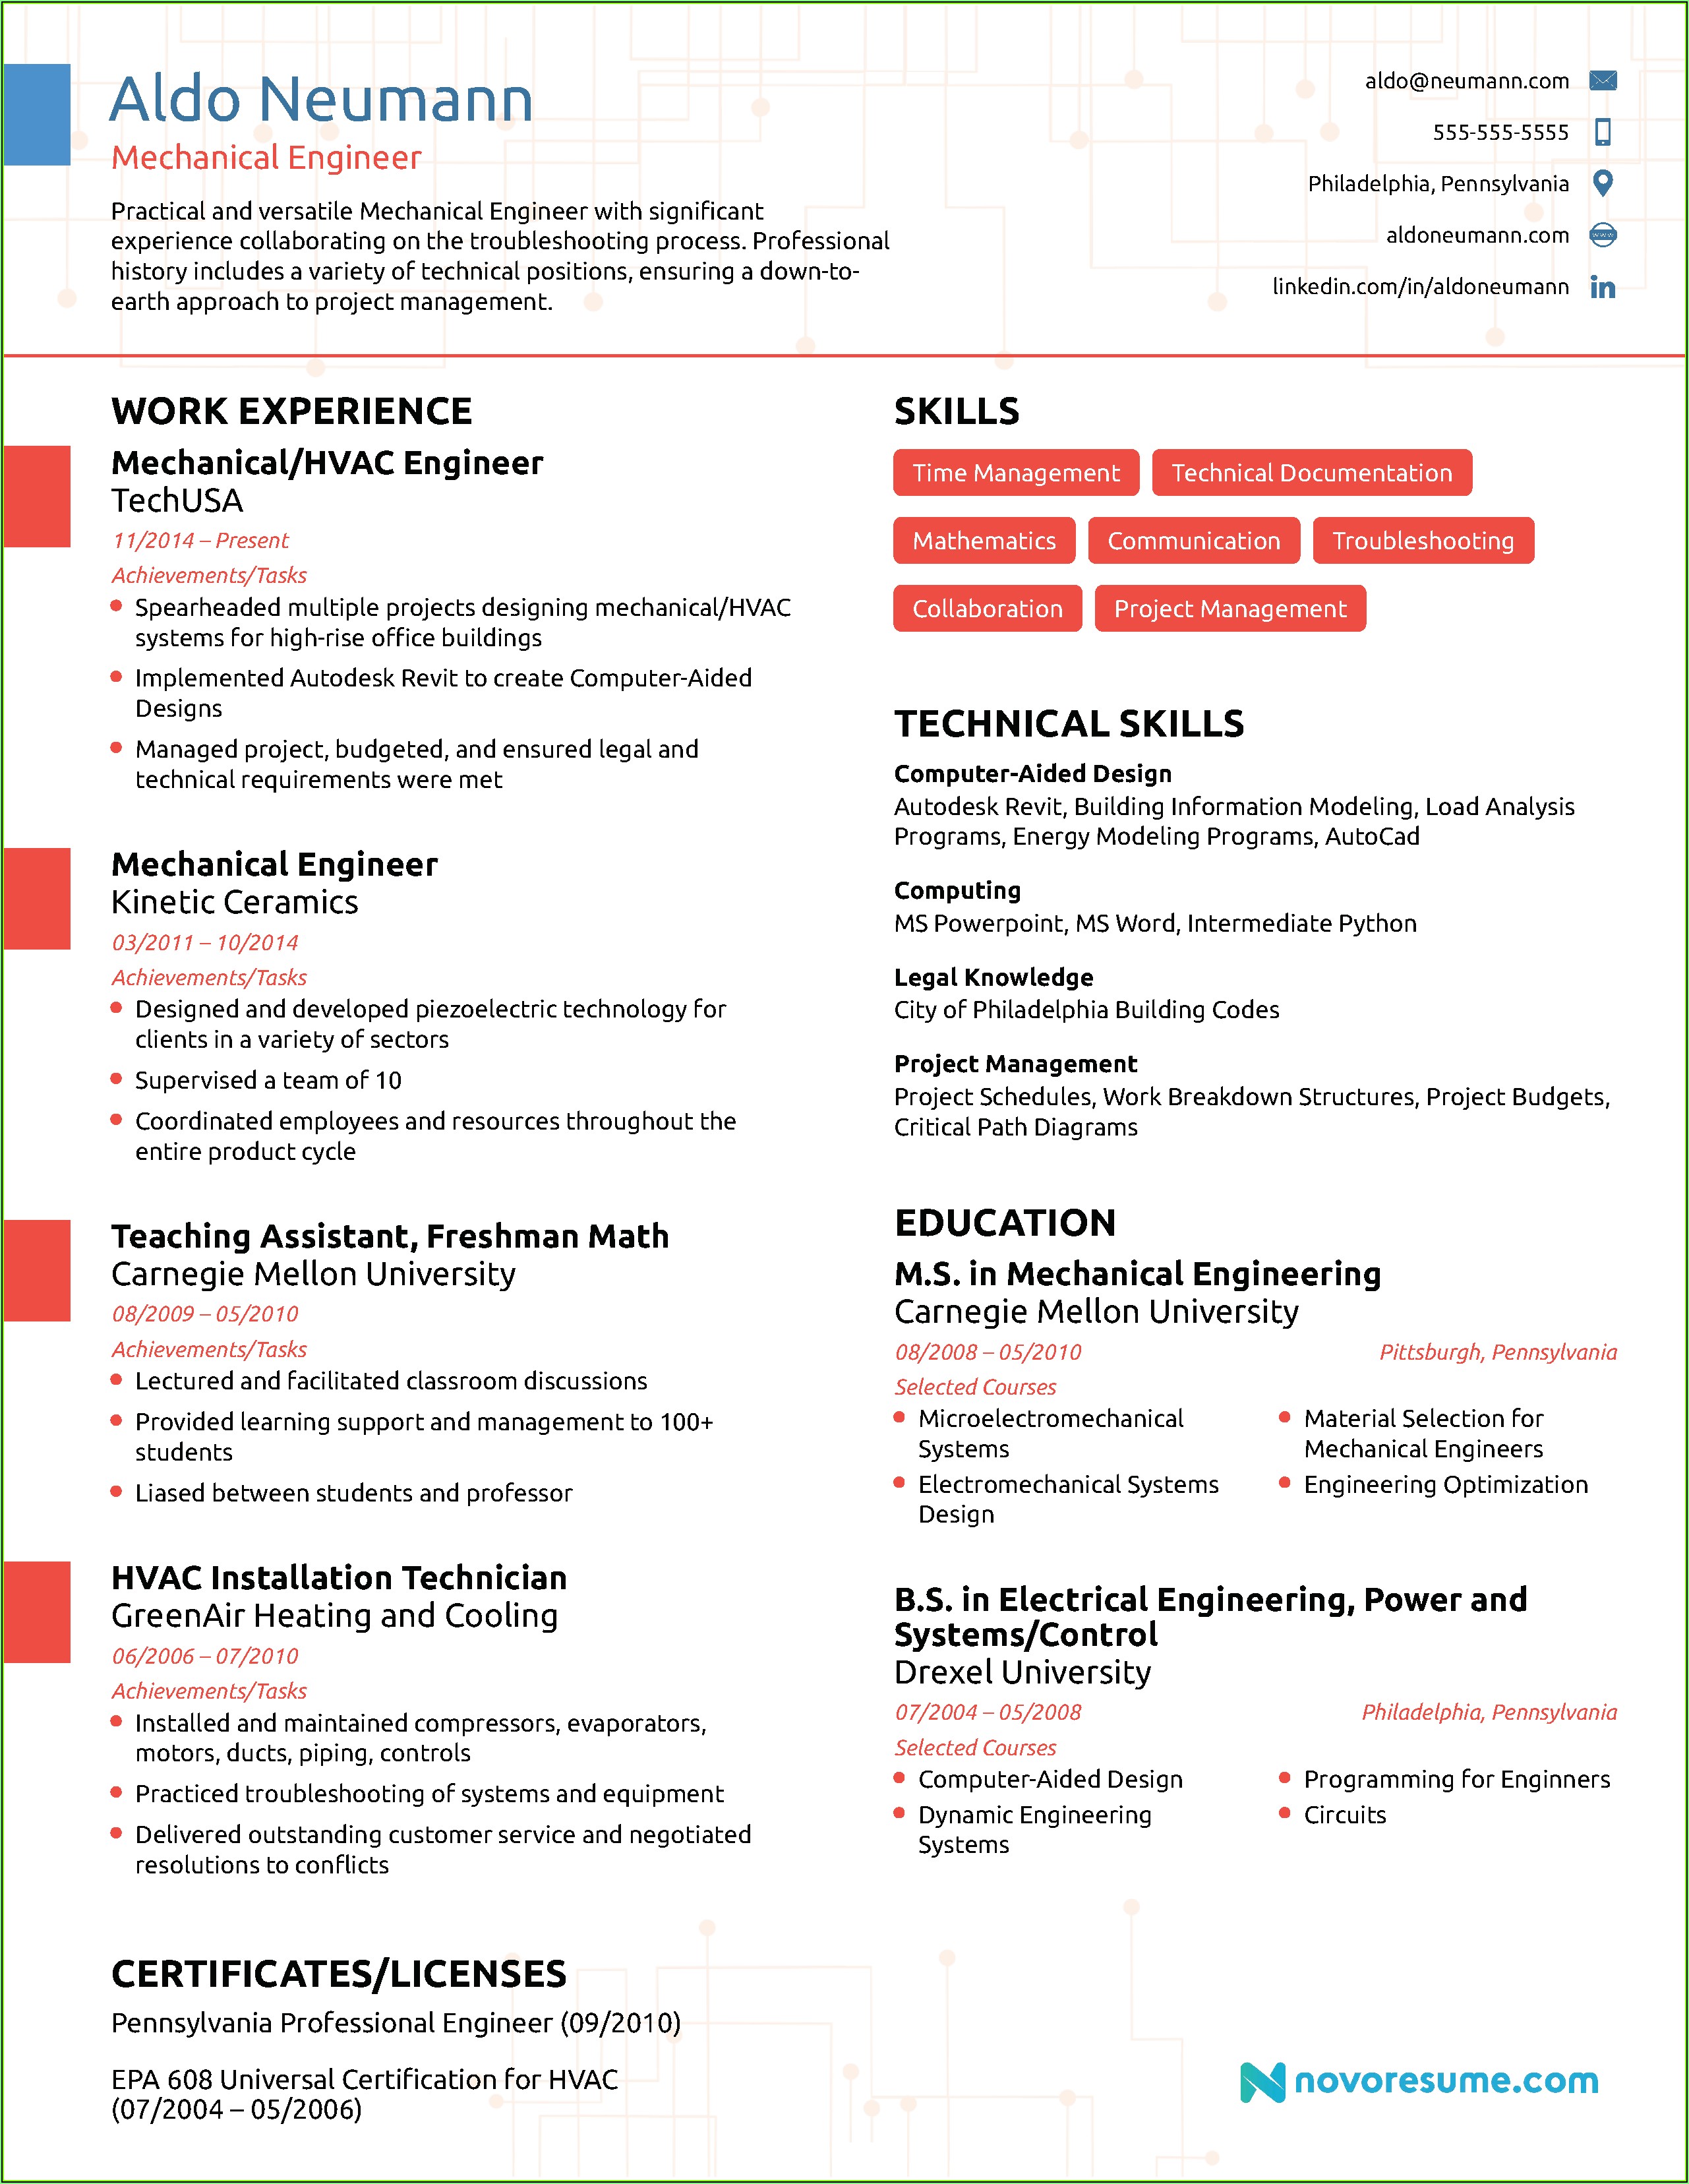 Resume Writing For Engineers